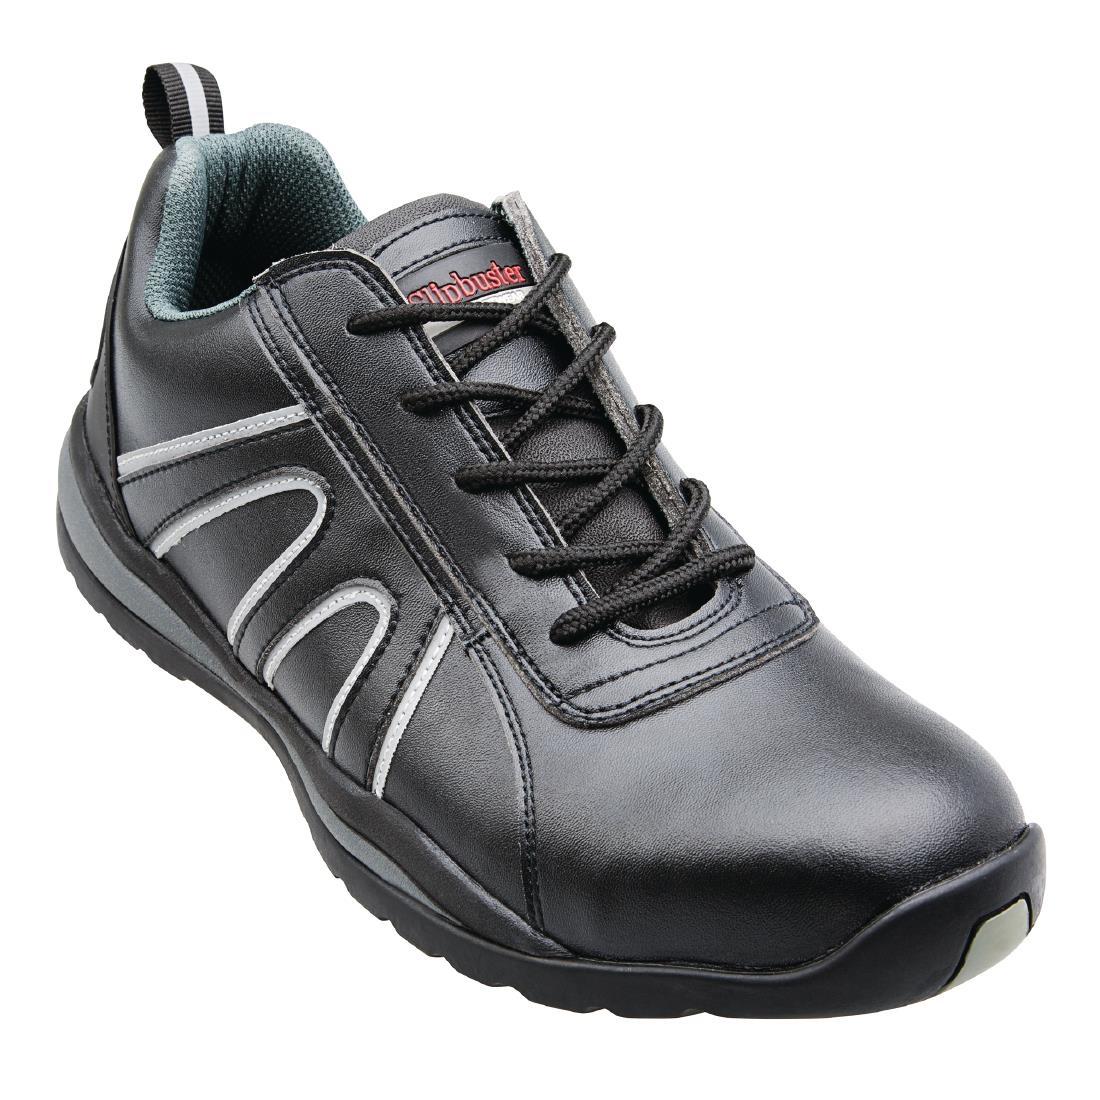 Slipbuster Safety Trainers Black 43 - A708-43  - 6